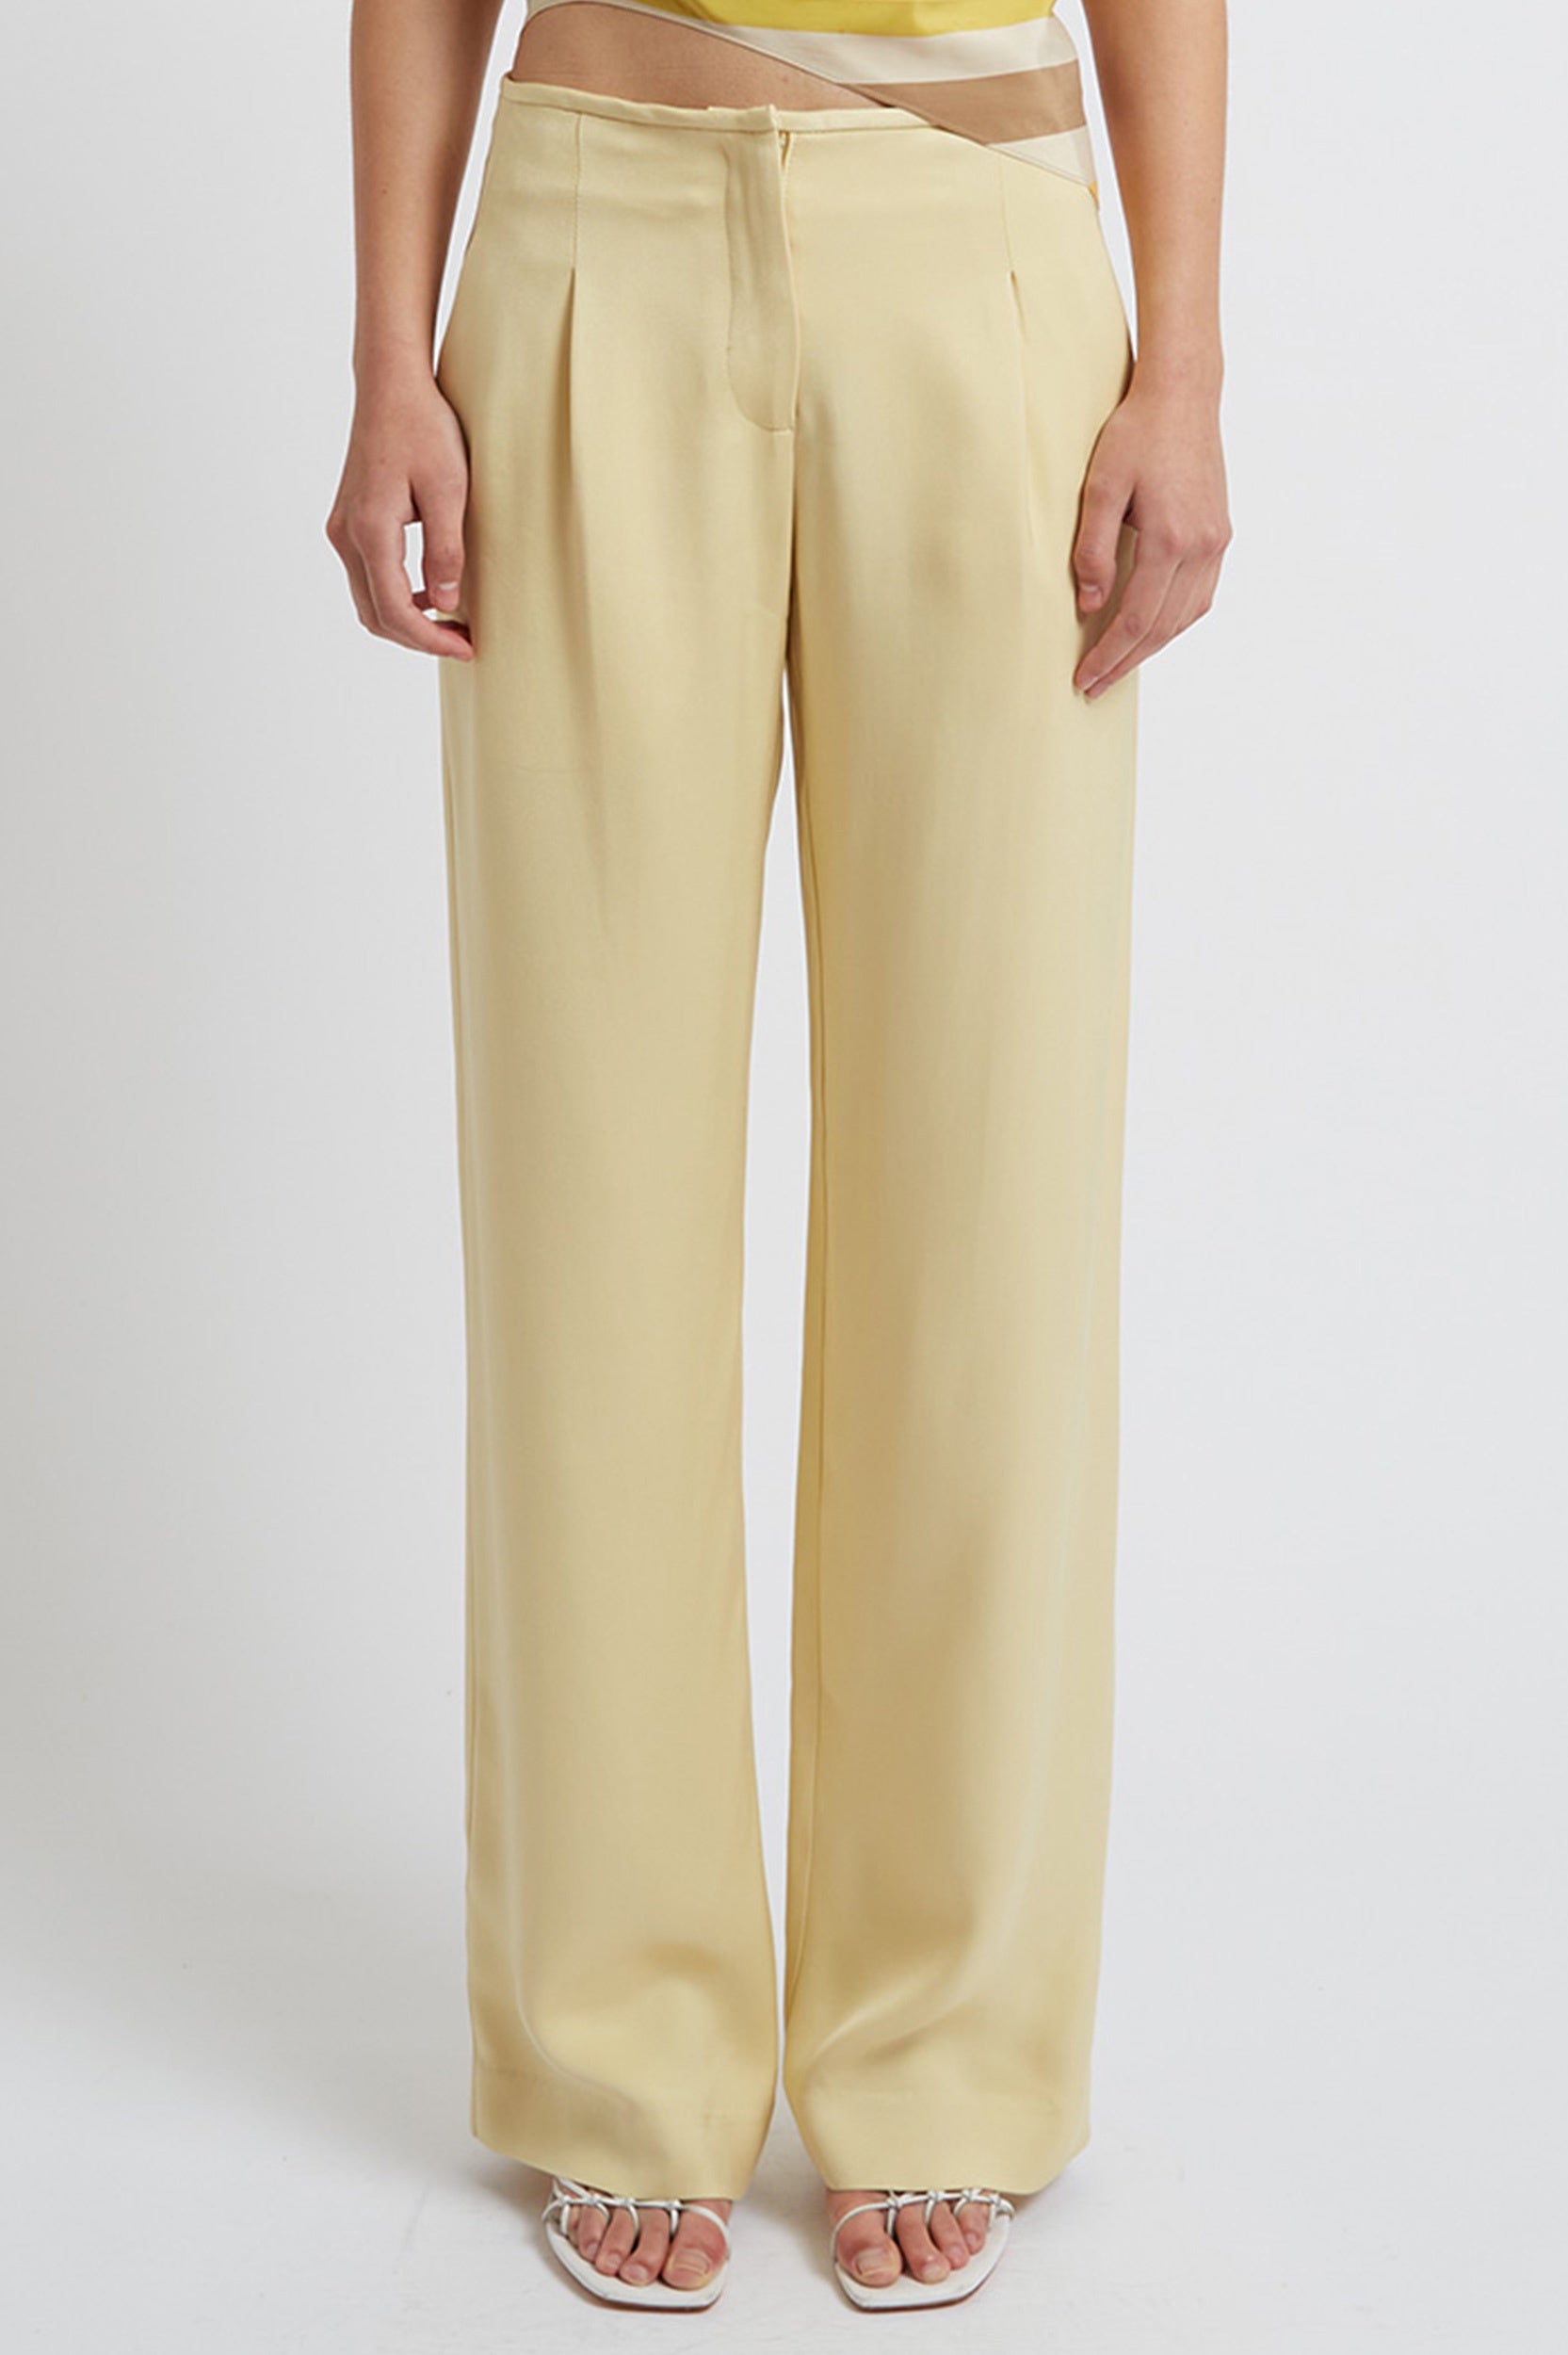 Low Rise Trouser in Anise